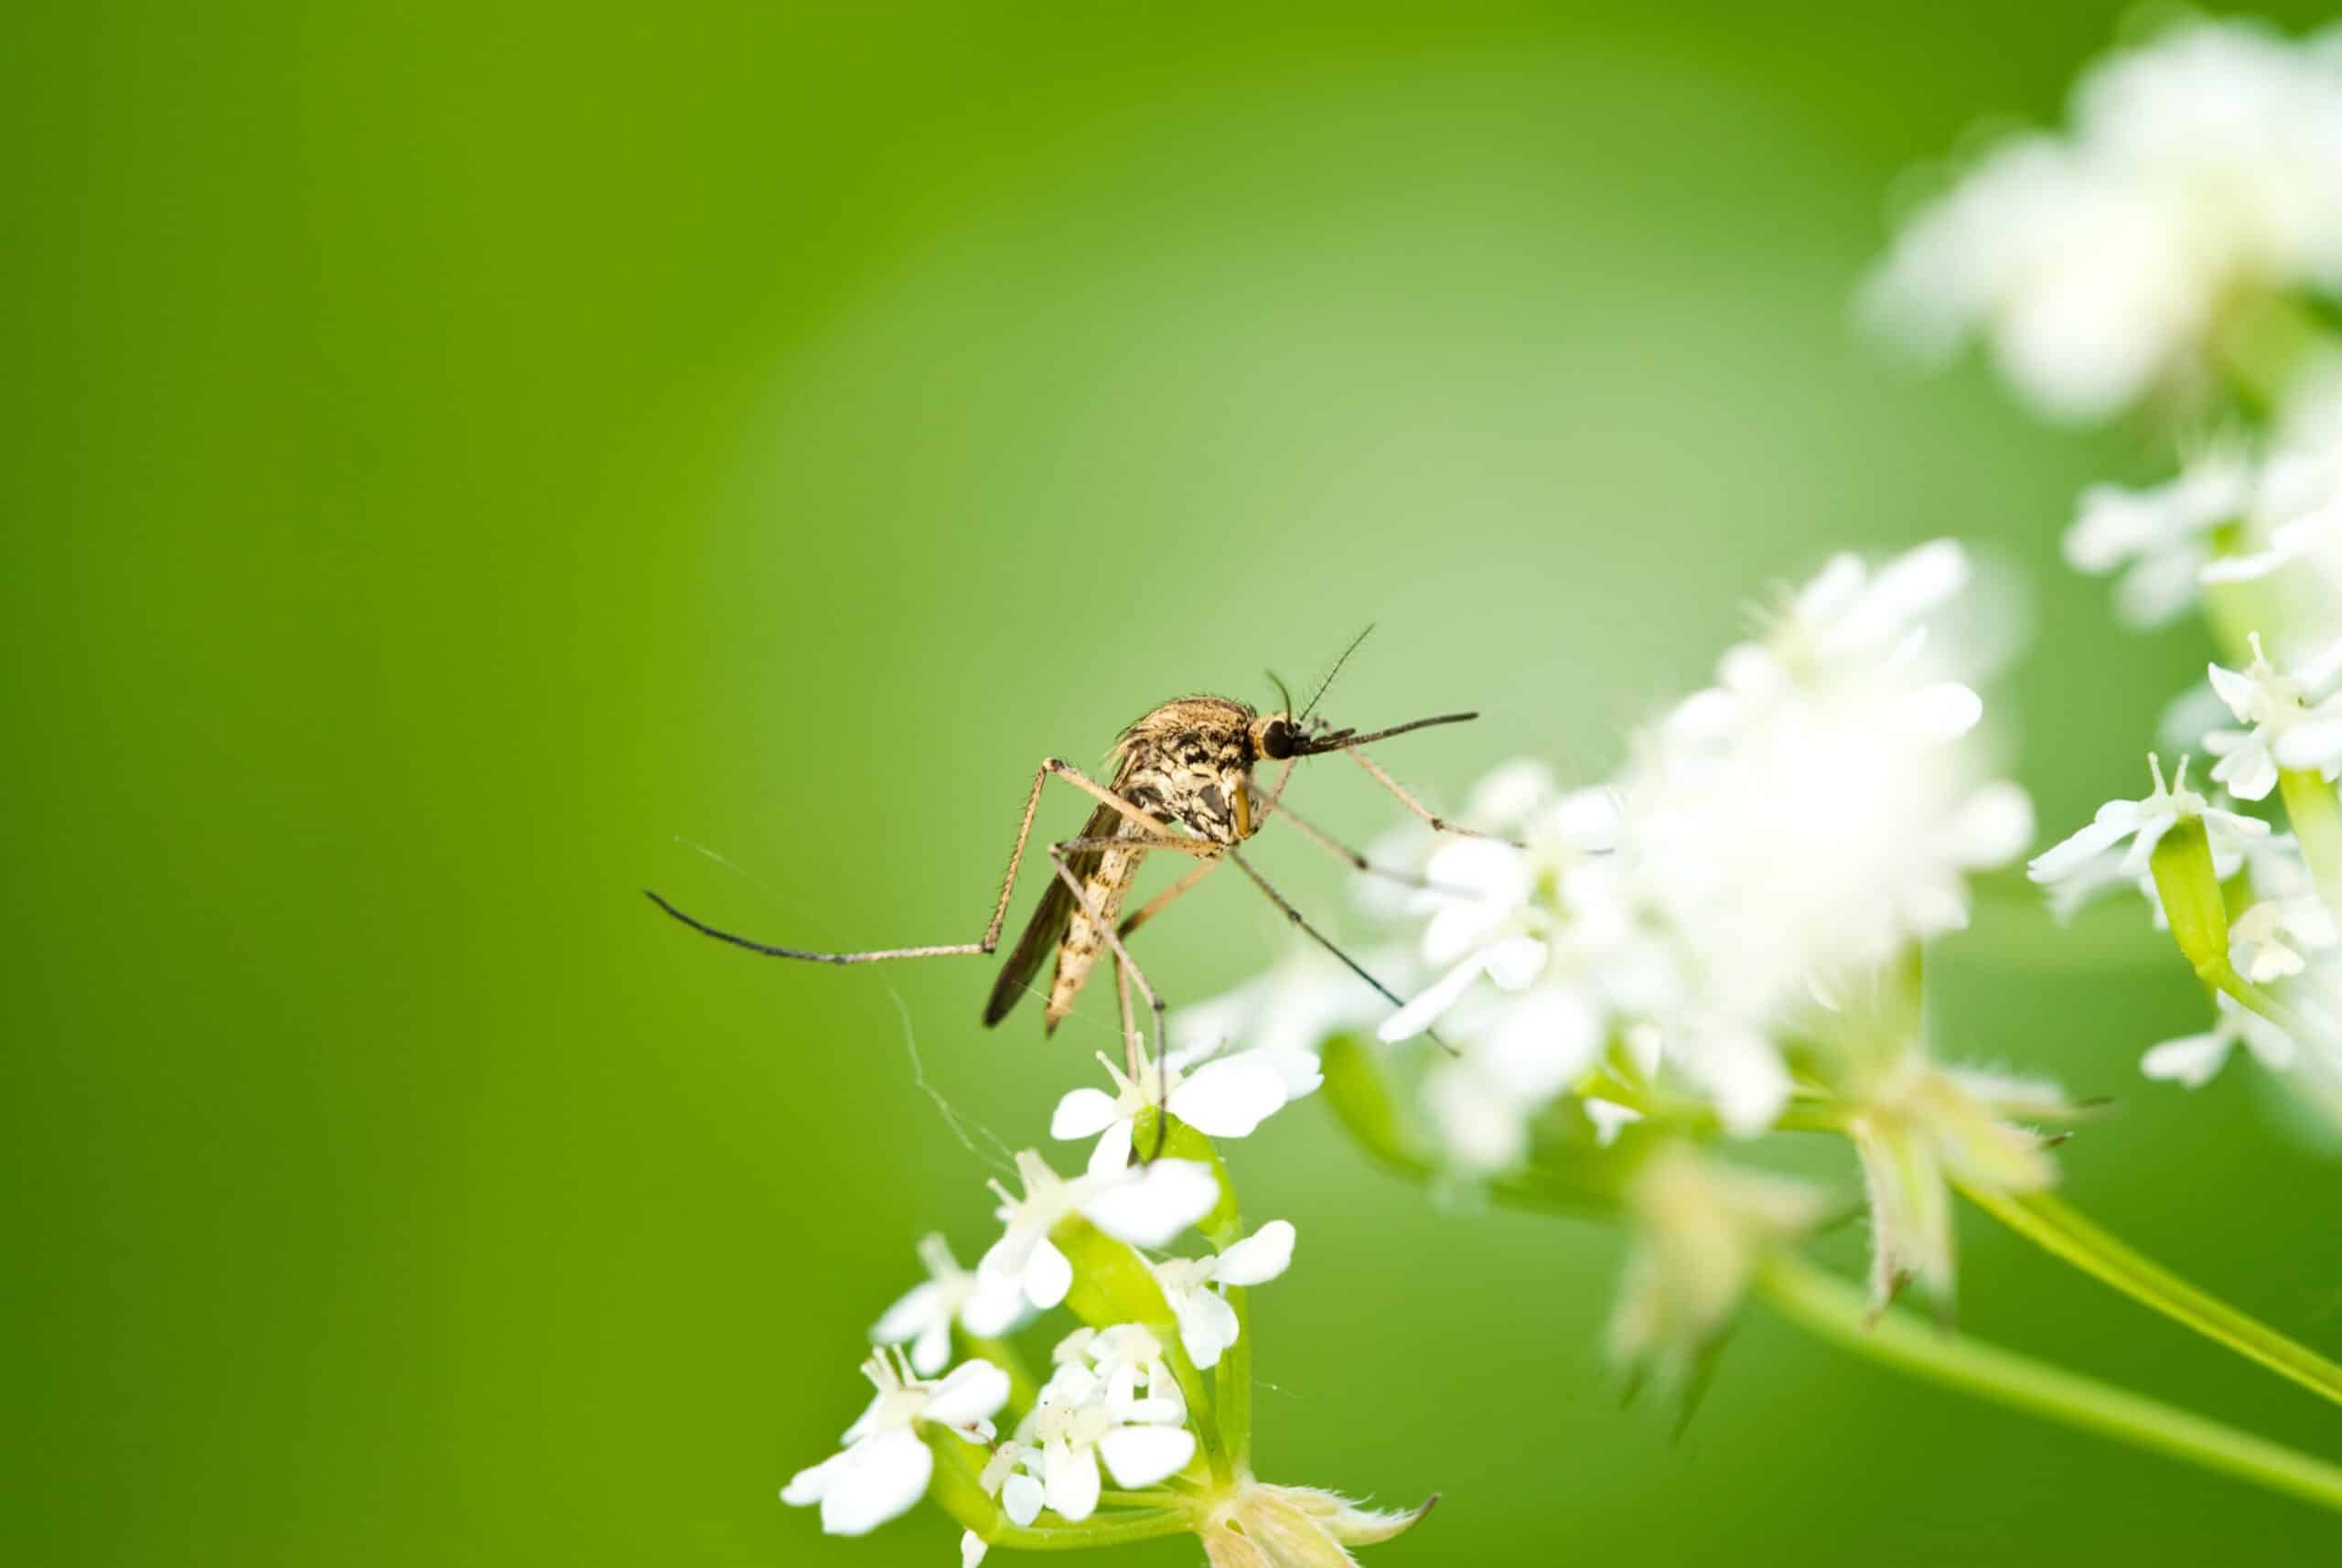 Mosquito getting nectar from a white flower.